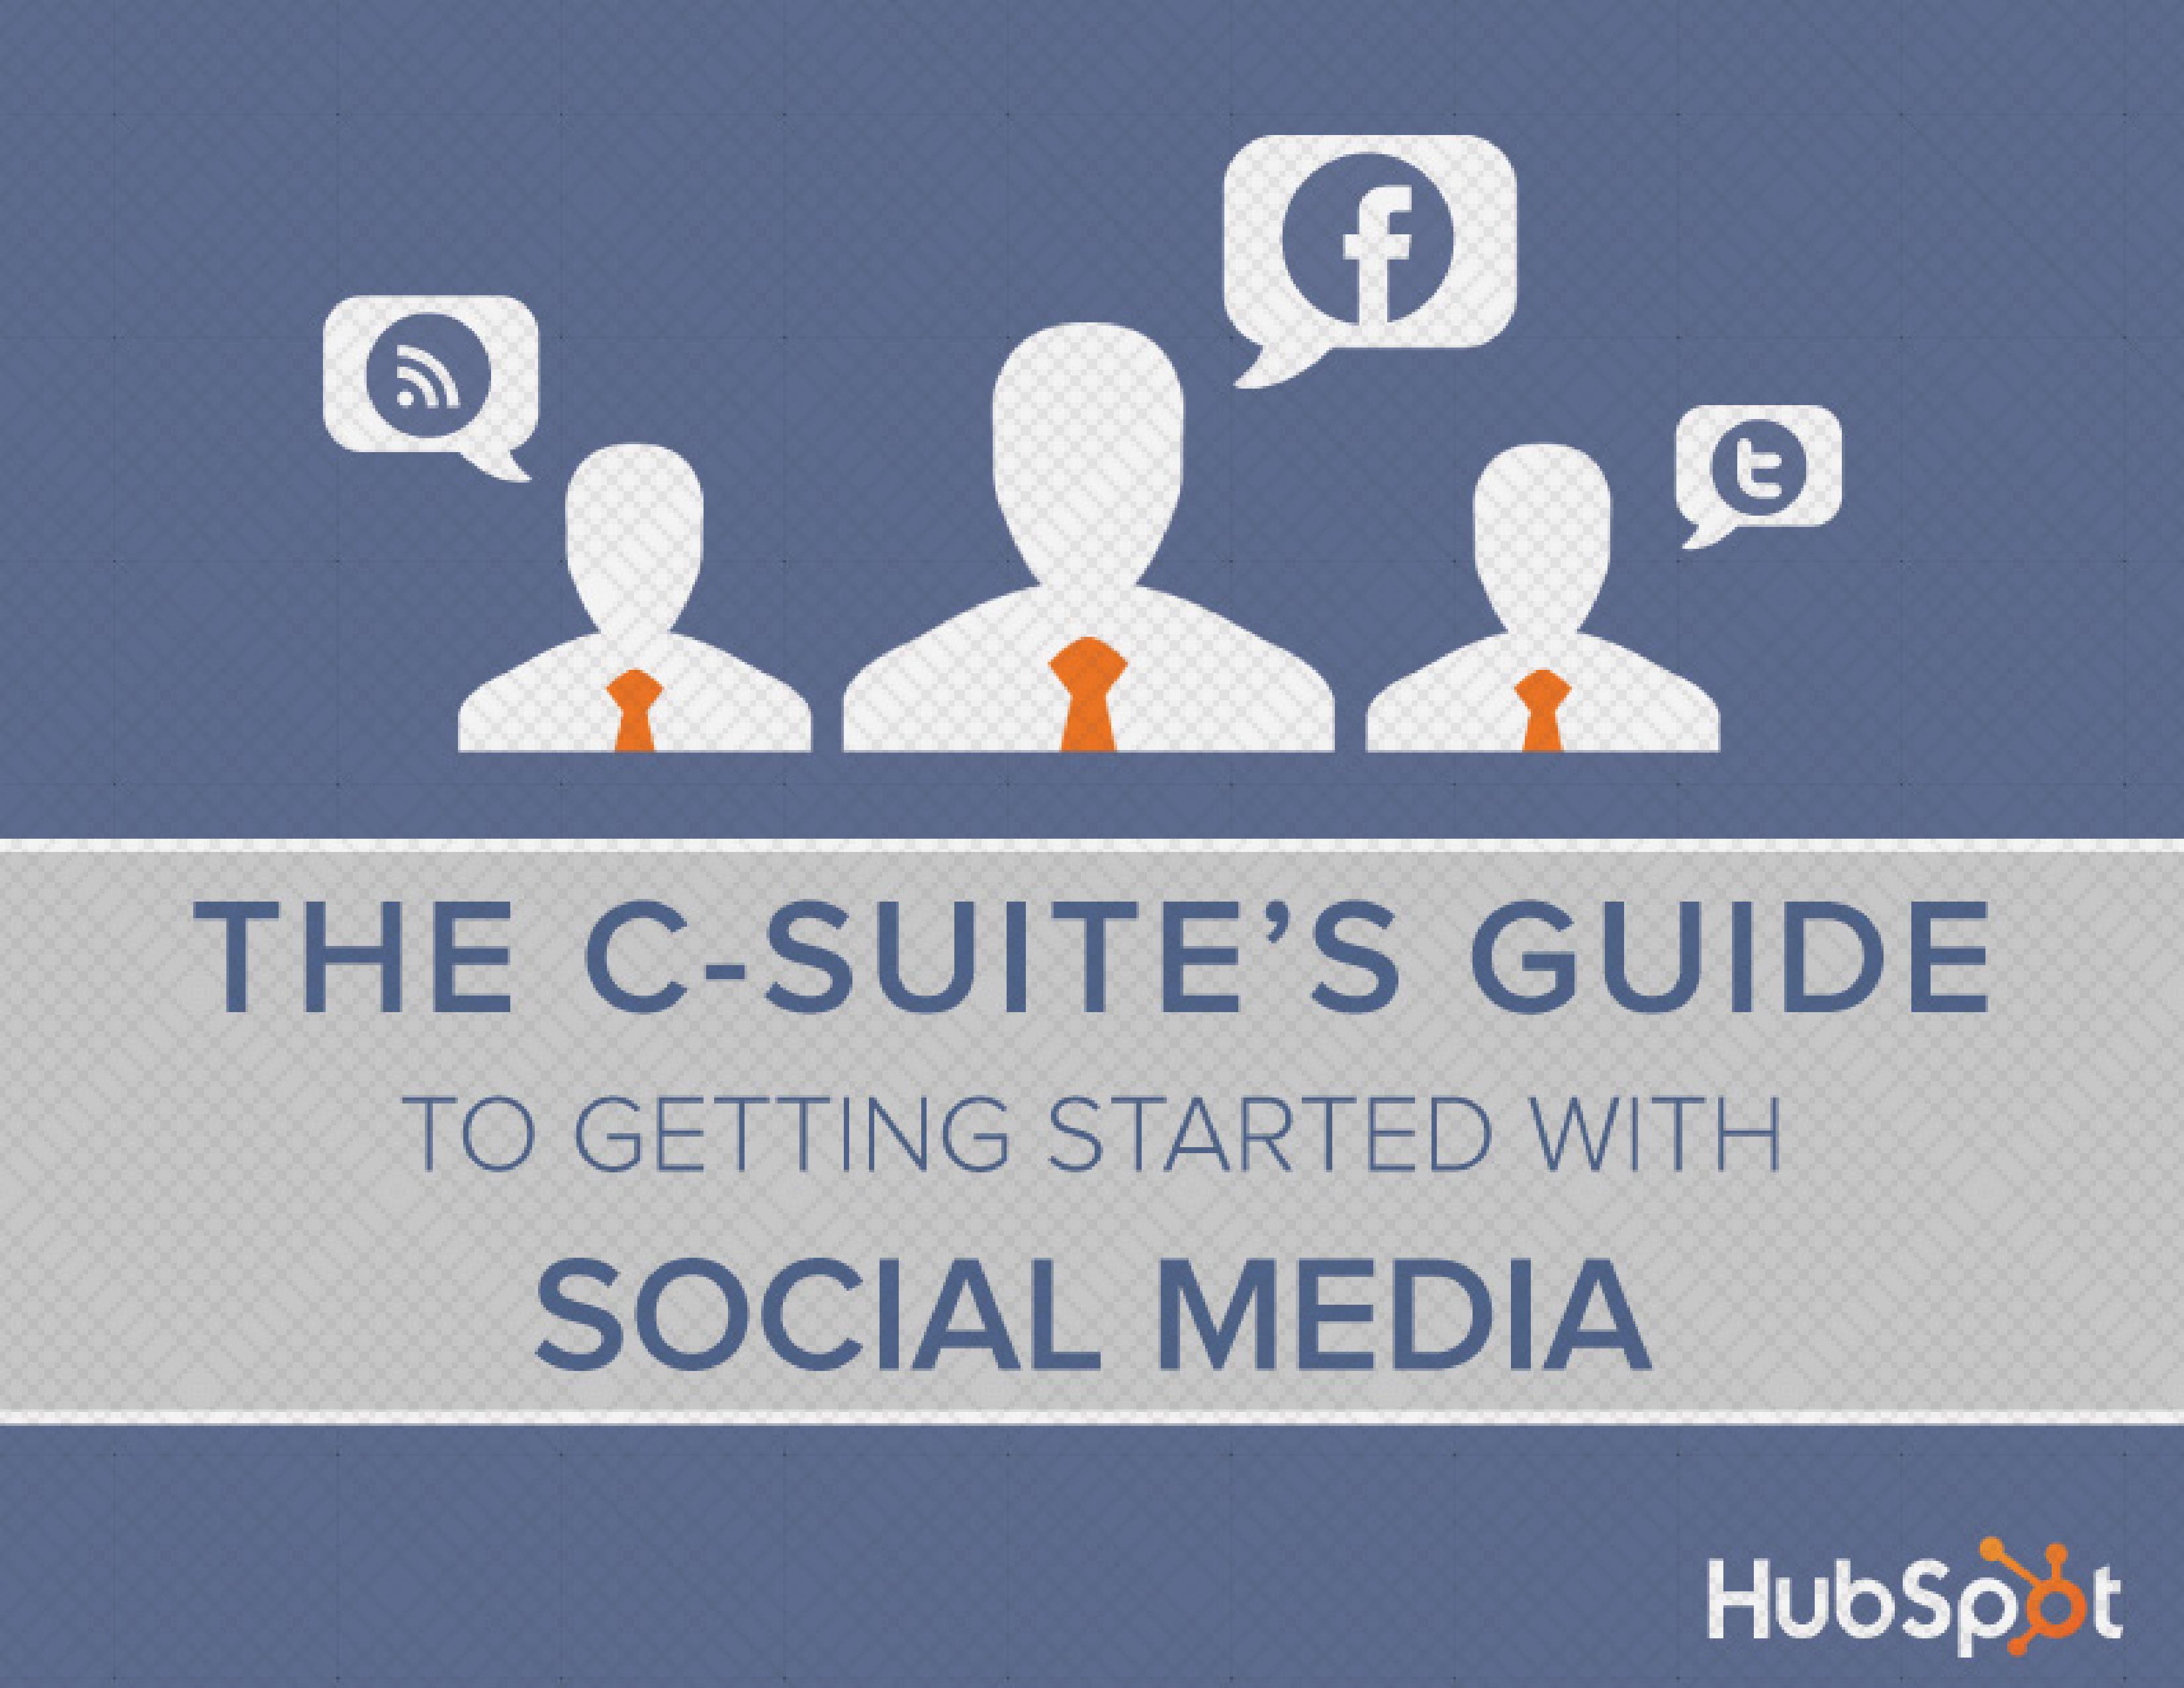 c-suite guide to social media